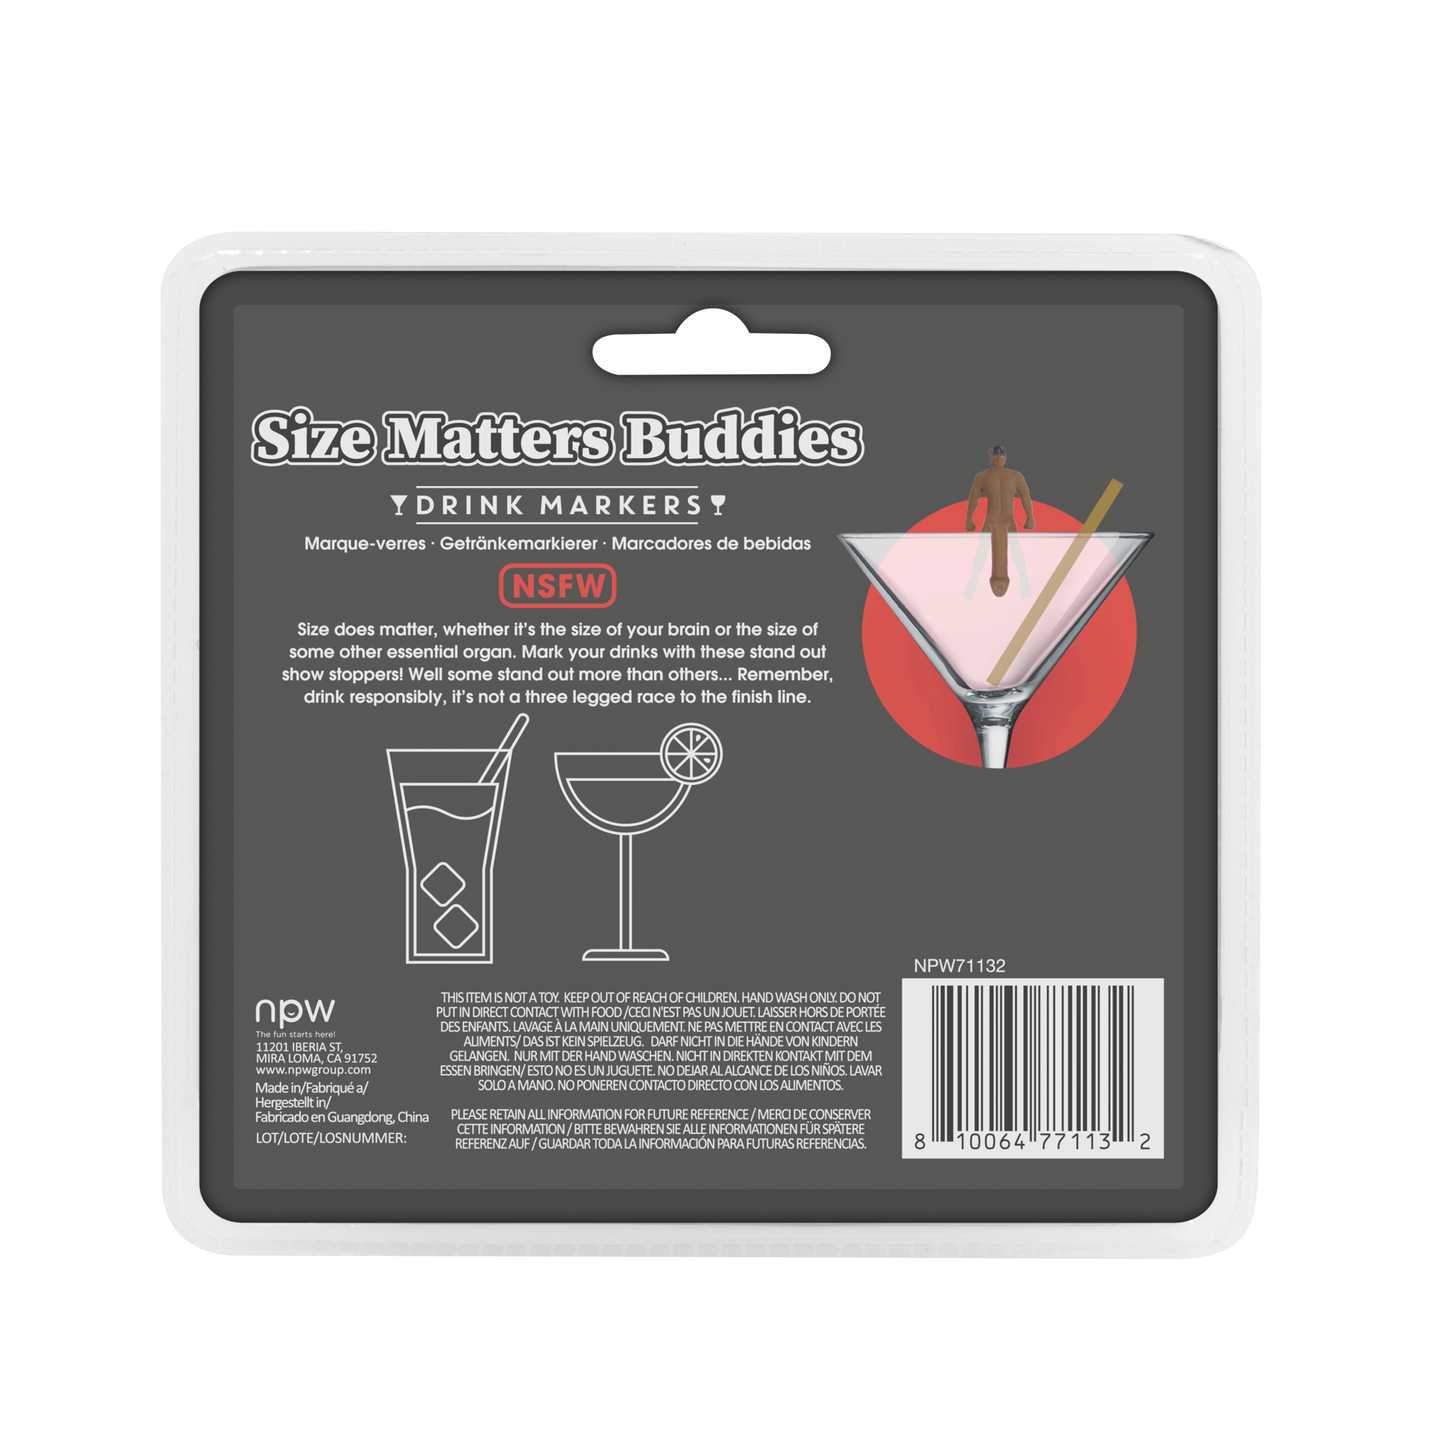 Size Matters Buddies Drink Markers